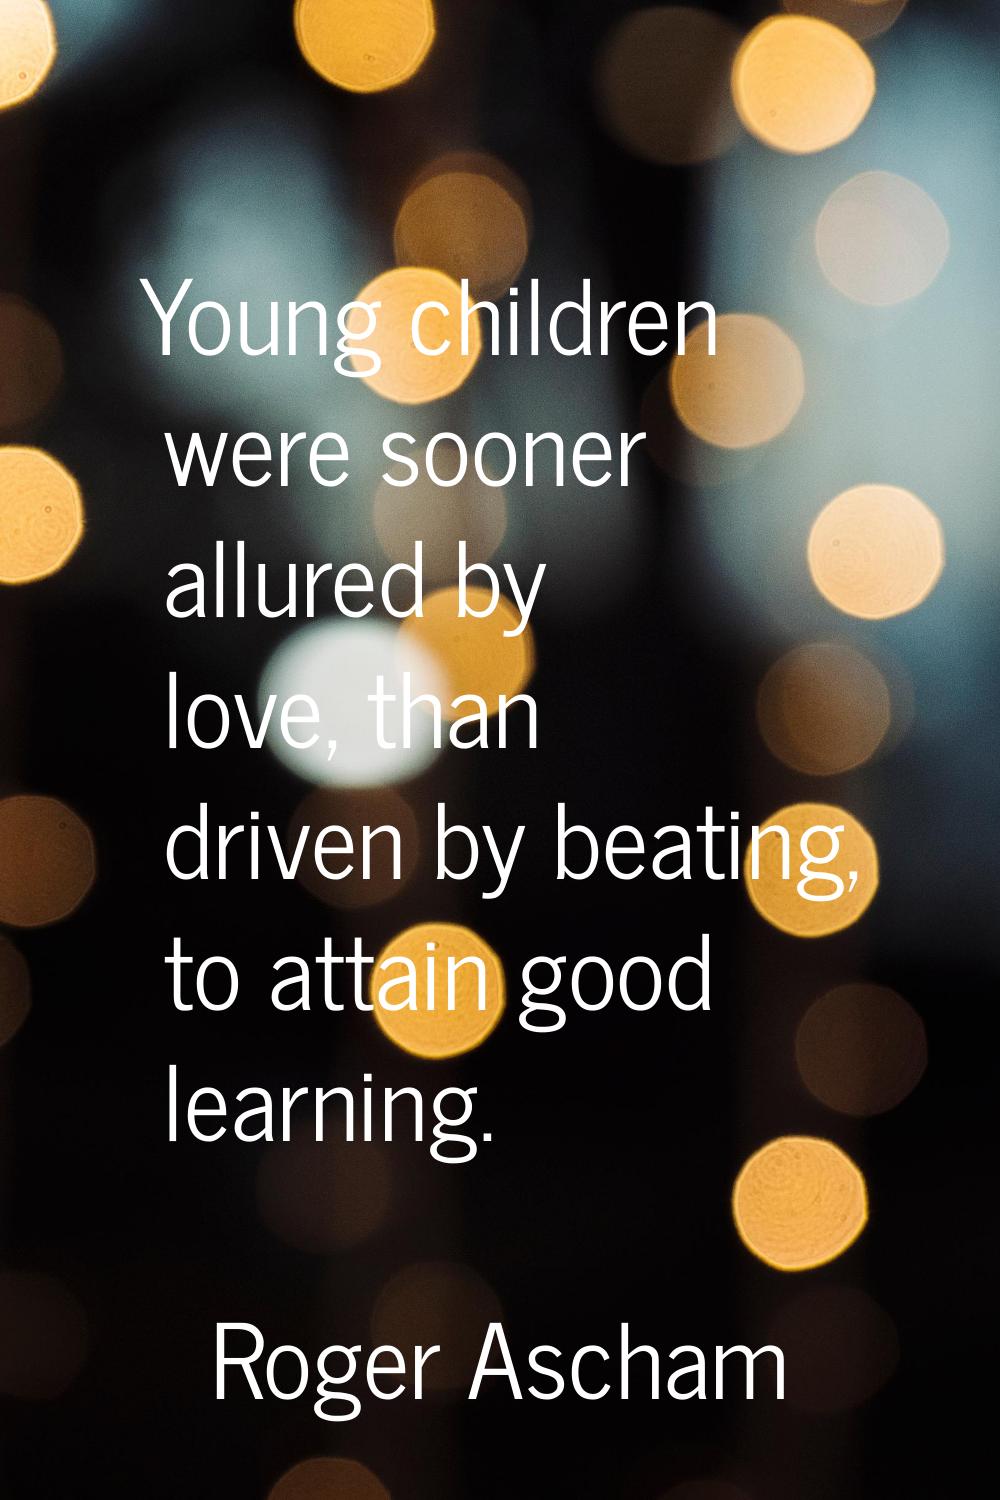 Young children were sooner allured by love, than driven by beating, to attain good learning.